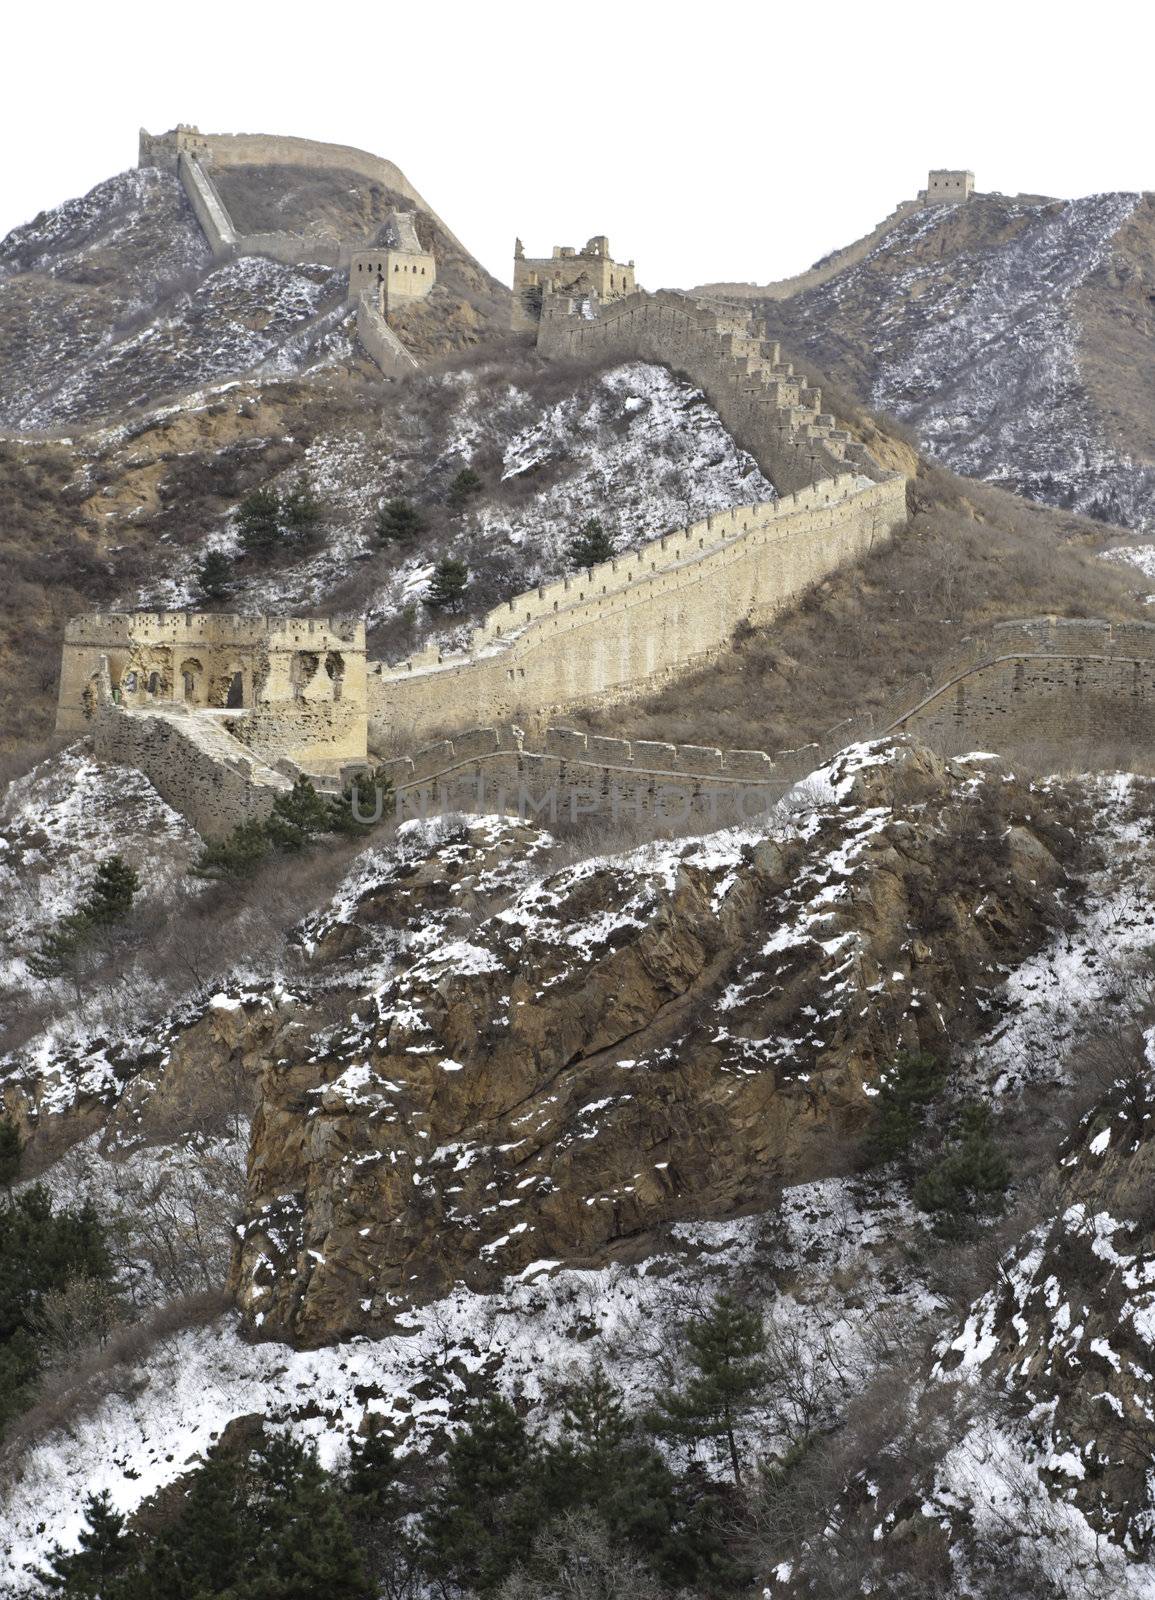 Distant view of the great wall of china with snow on the mountain